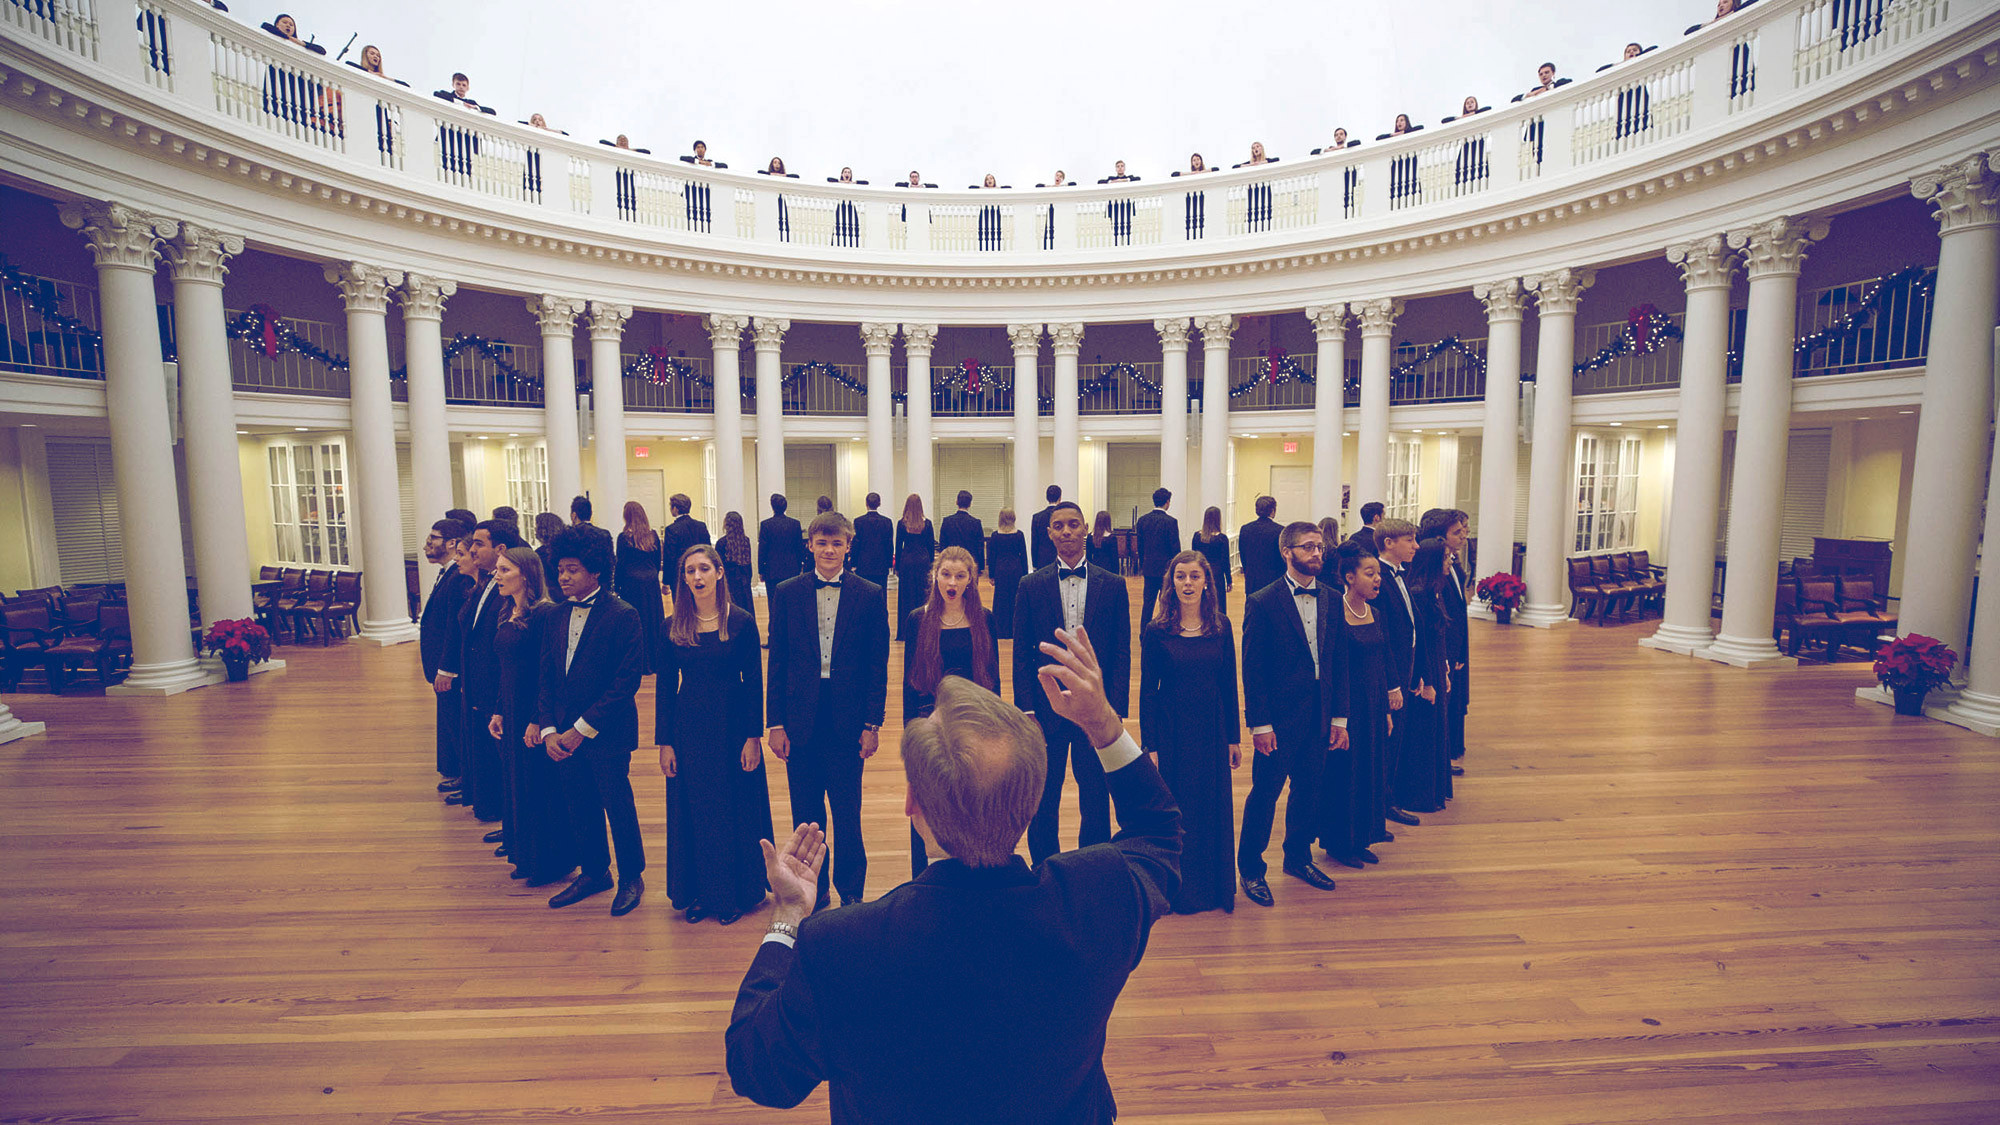 UVA choir singing in the Rotunda for a Holiday performance in the Dome Rome for a video